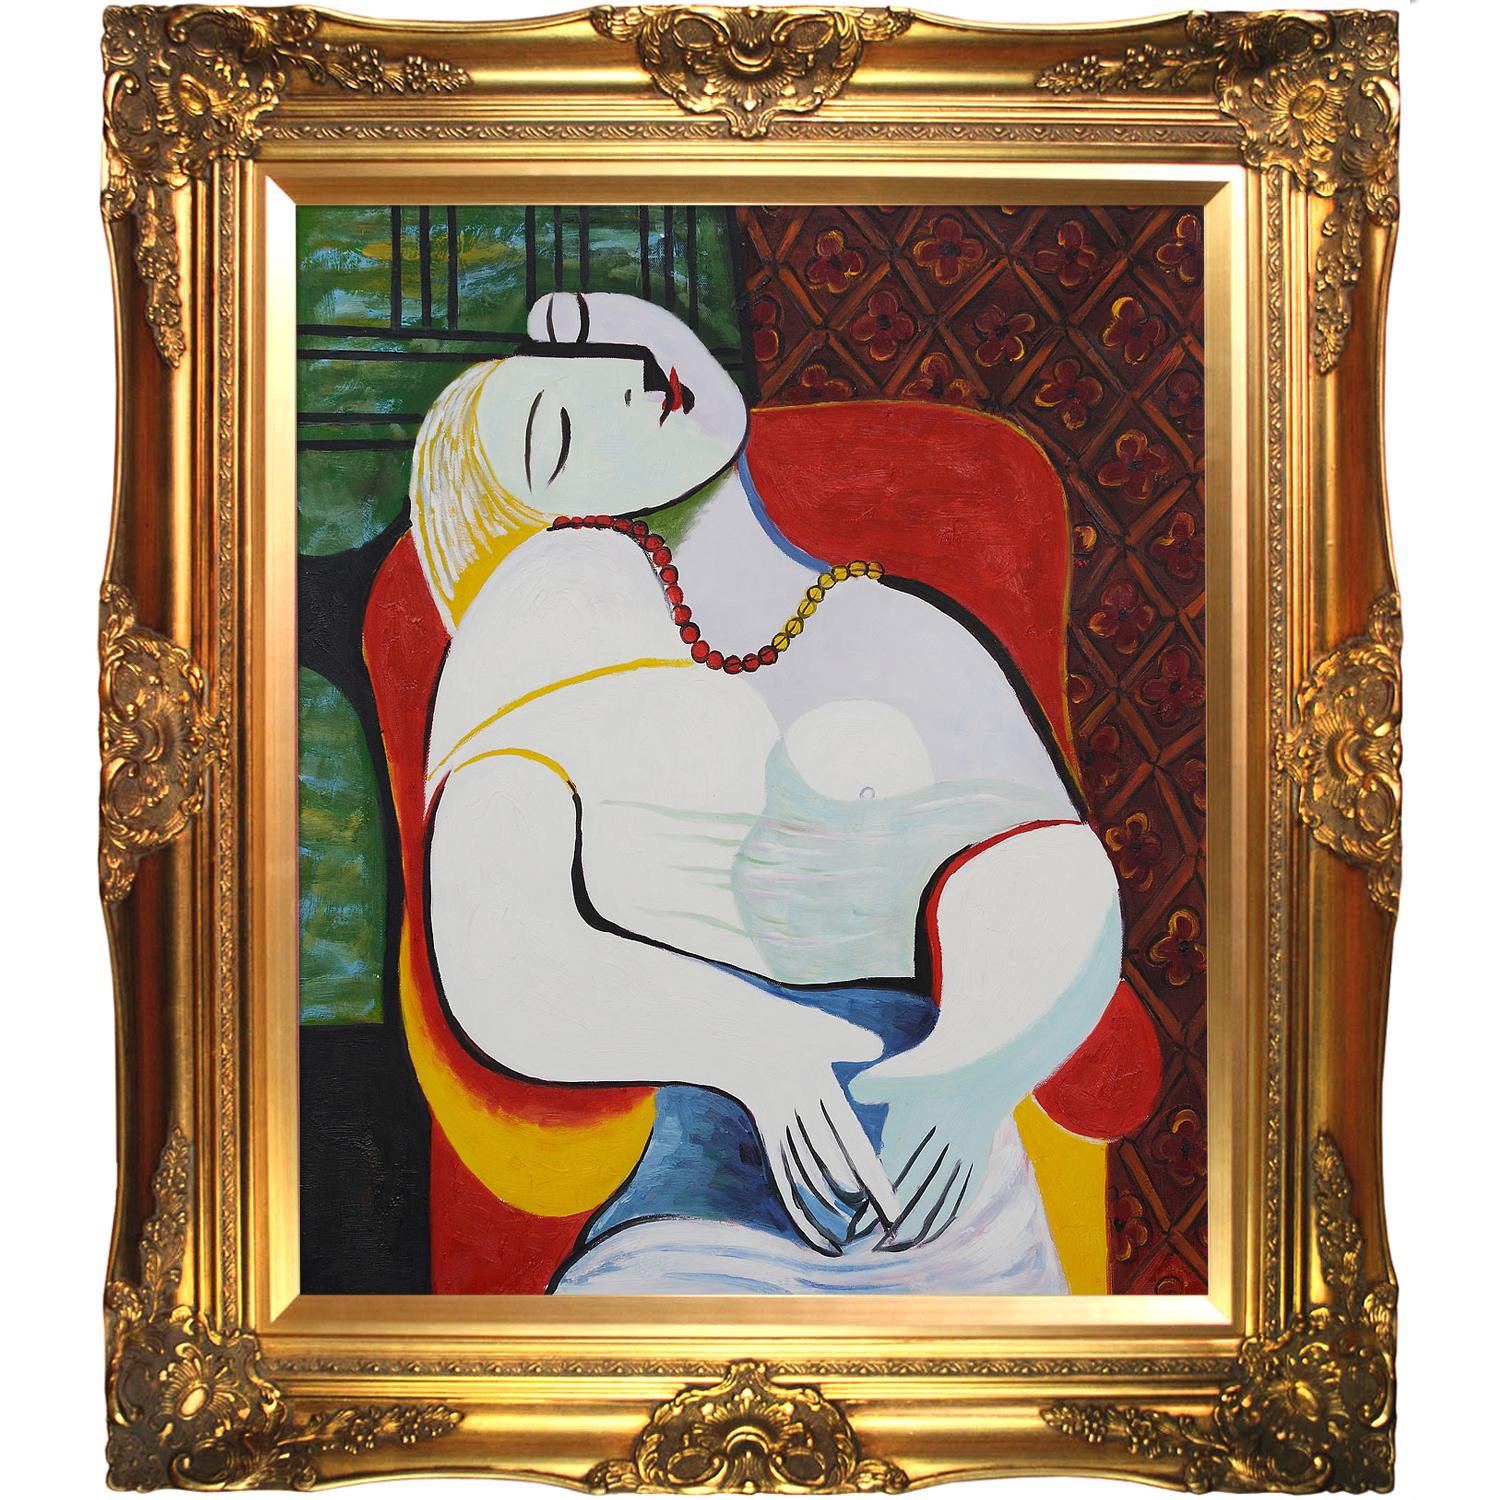 Years After The Elbow Incident, Steve Wynn Sells Picasso's 'Le